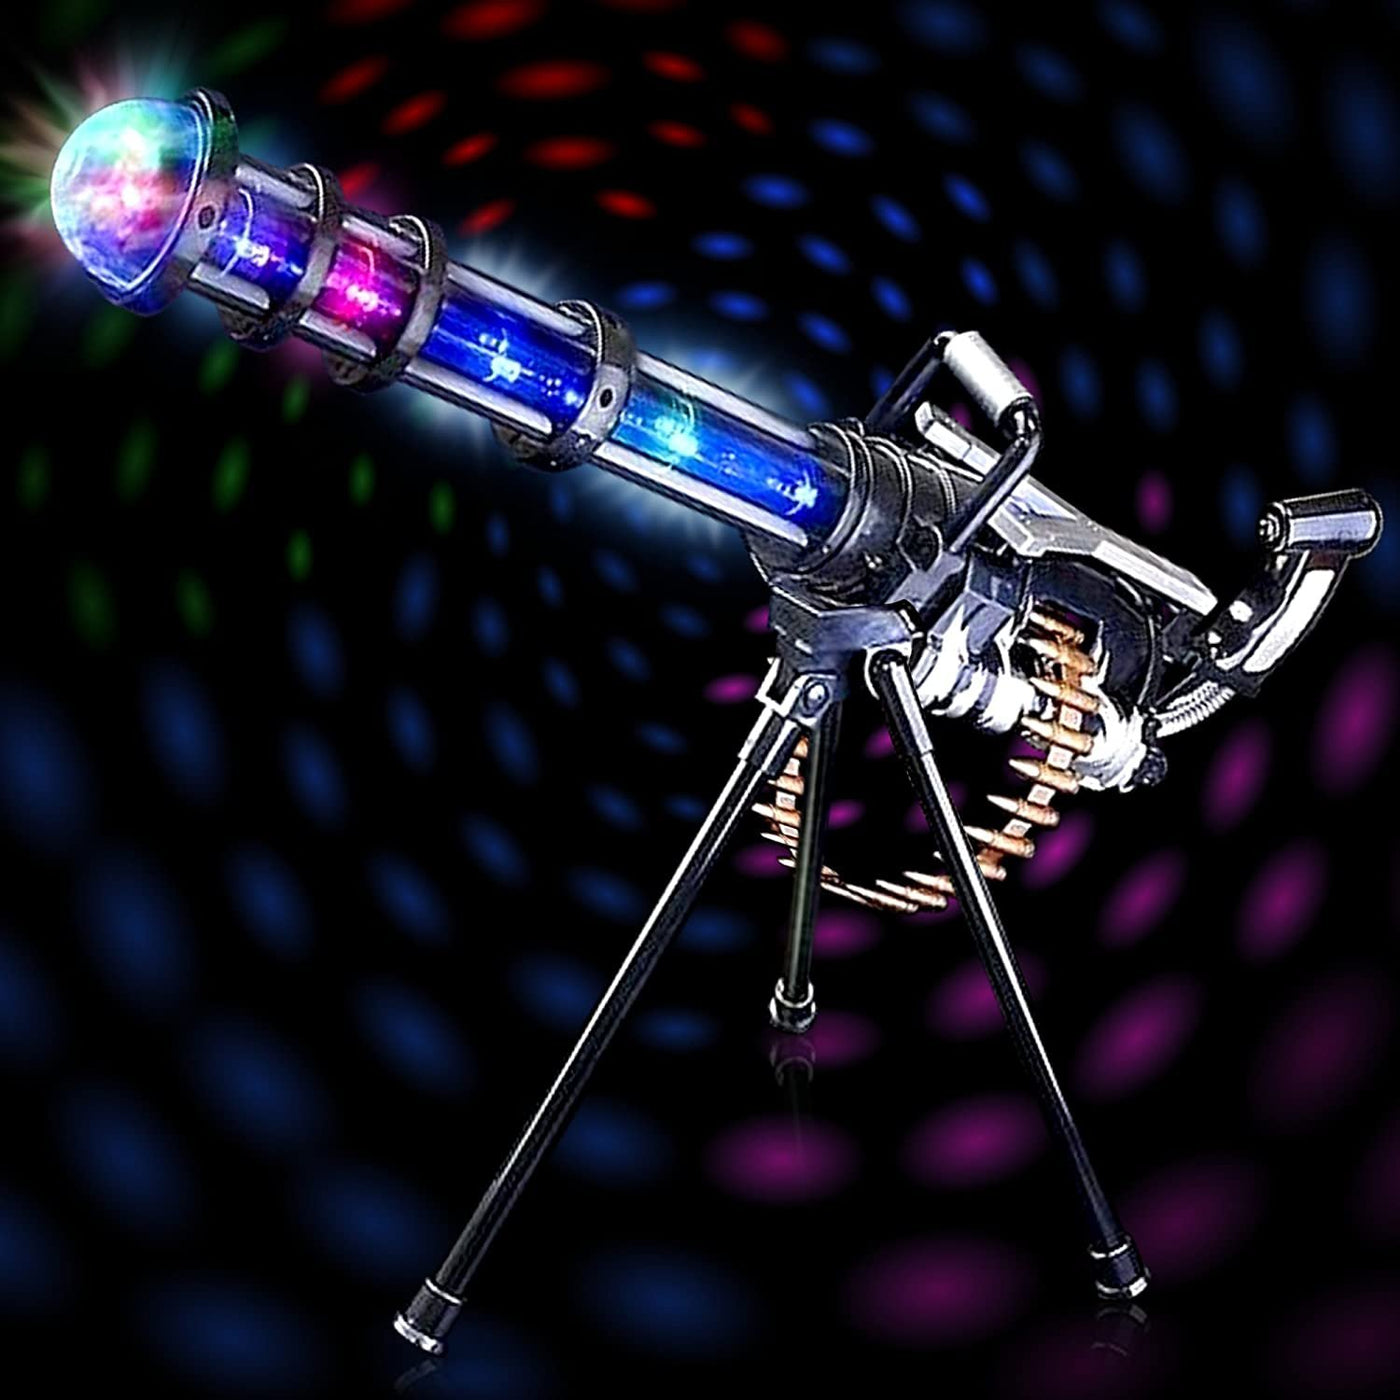 ArtCreativity Light Up Rotary Machine Toy Gun with Tripod Stand Rotating Barrel, LED and Sound Effects - 23 Inch Pretend Play Military Rifle - Batteries Included - Great Gift for Boys and Girls